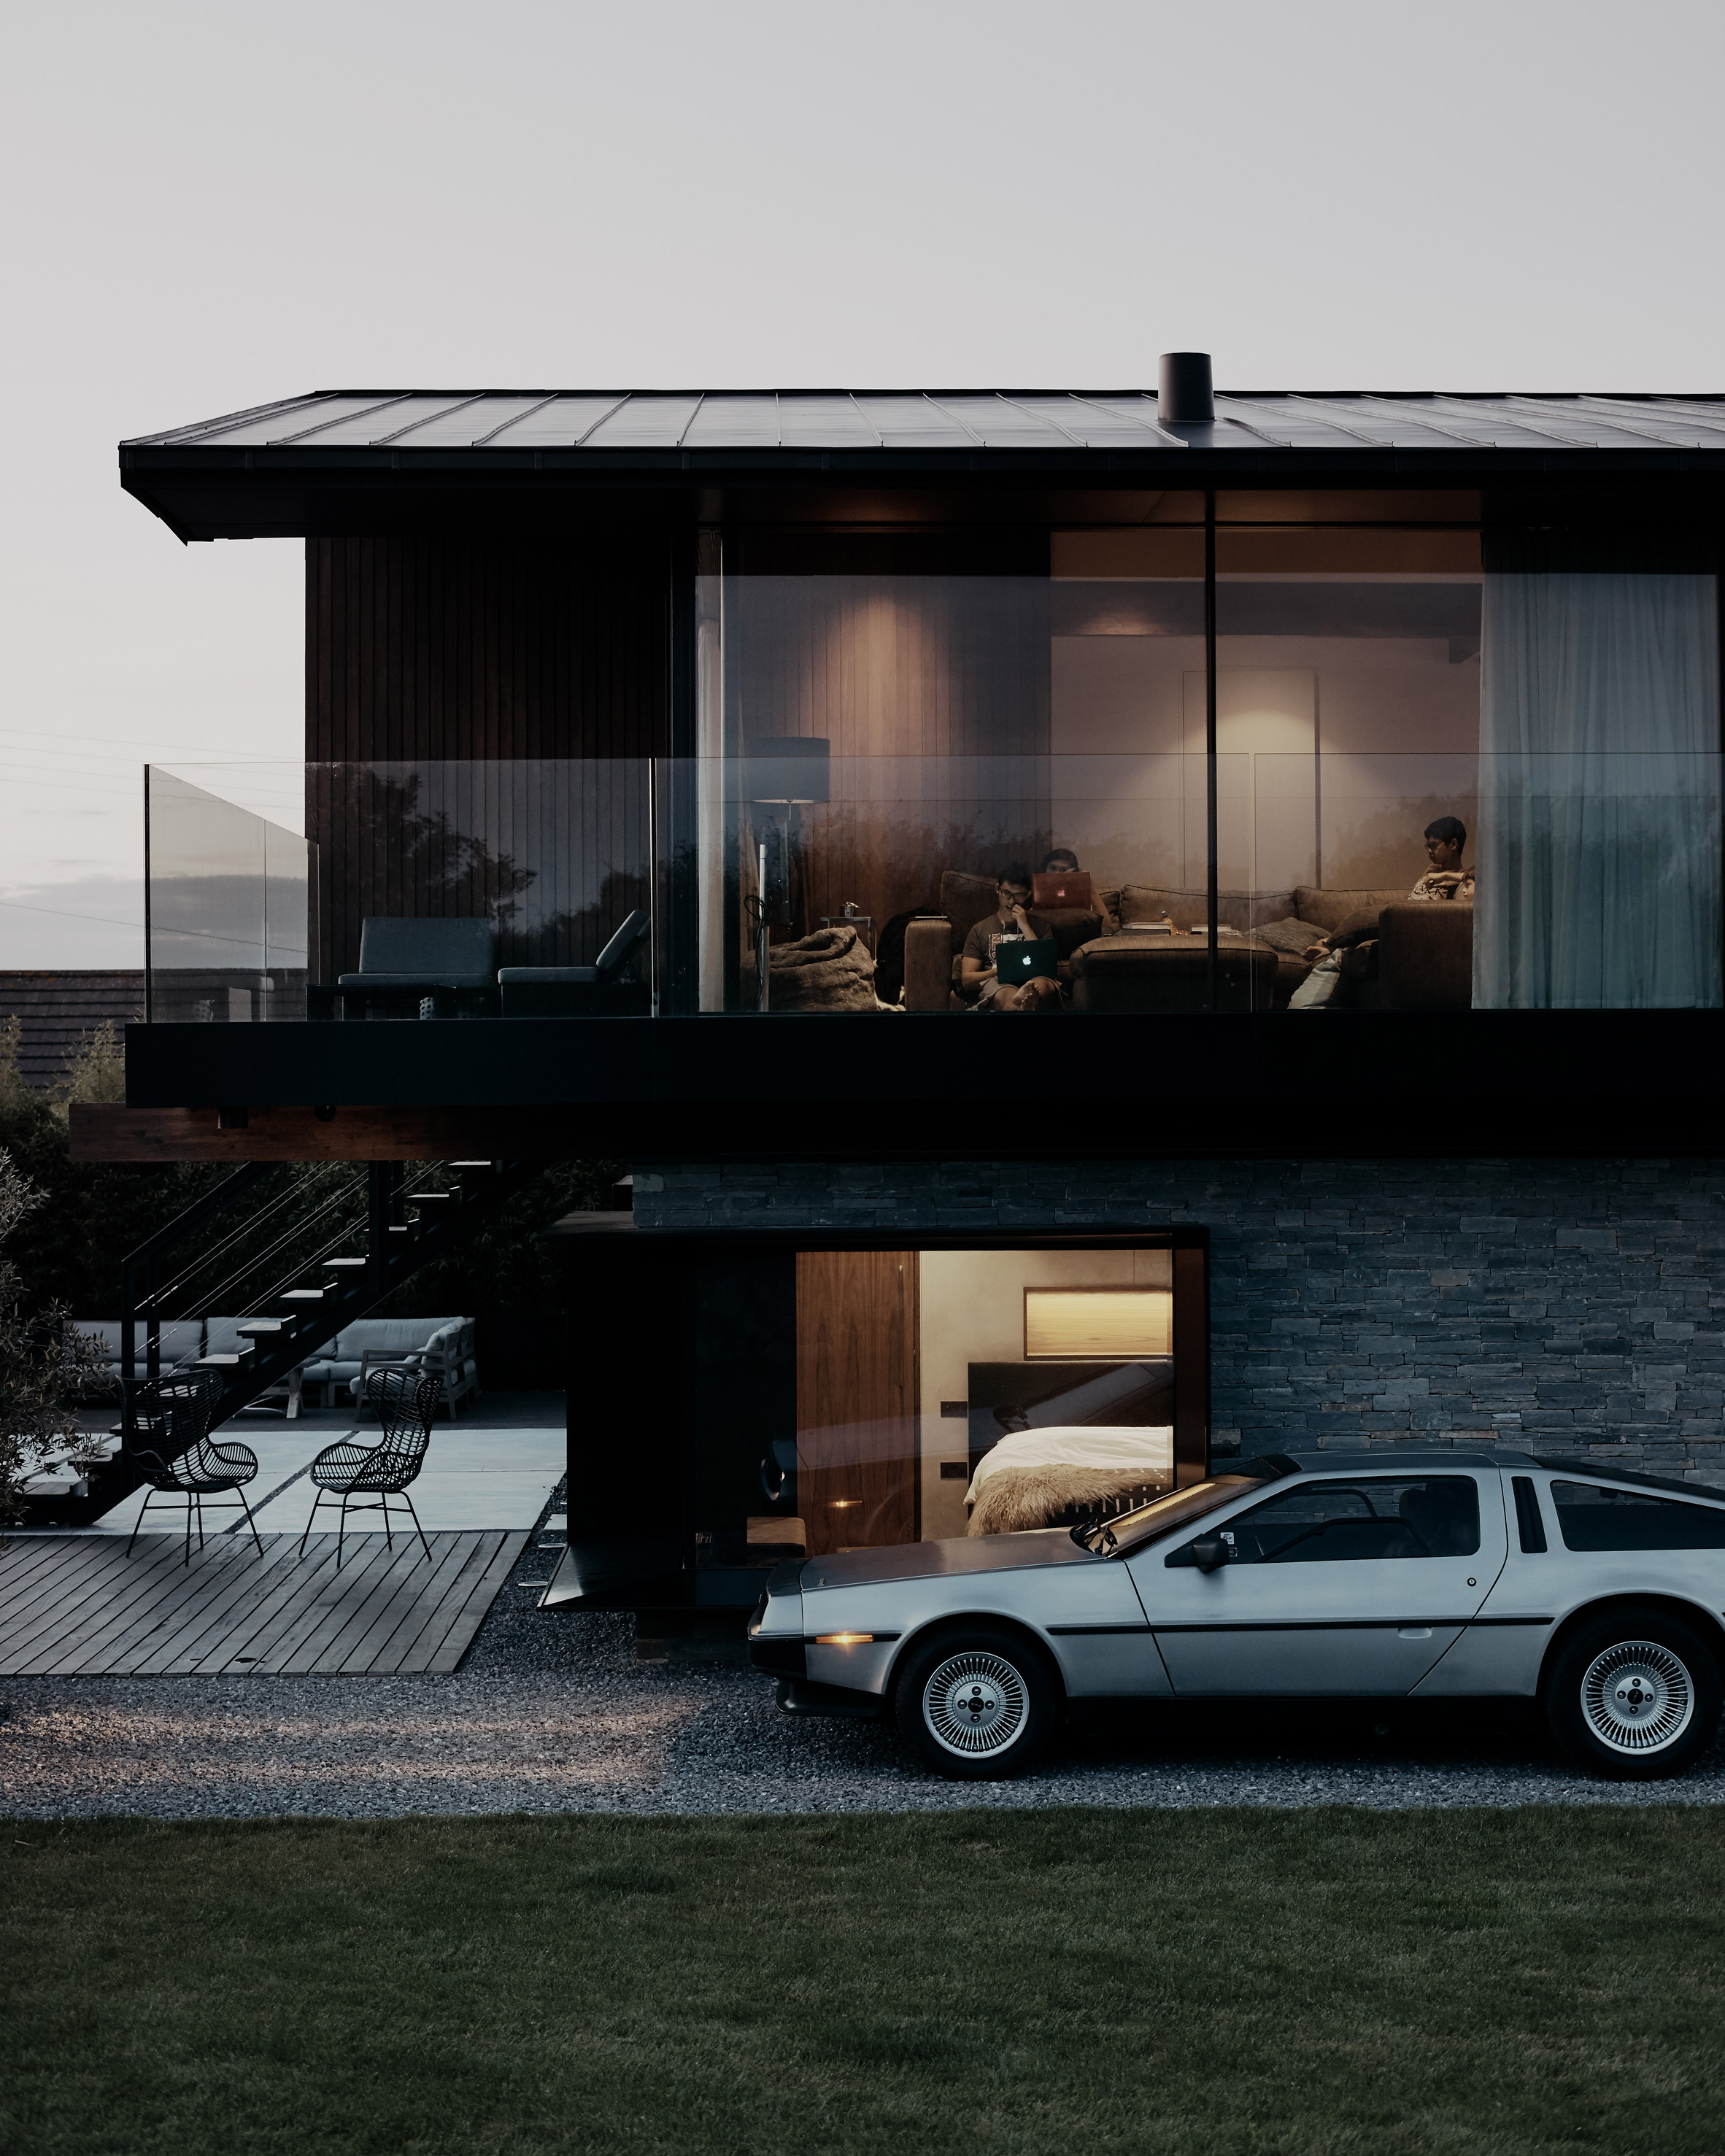 Silver House by Hyde + Hyde in Wales.